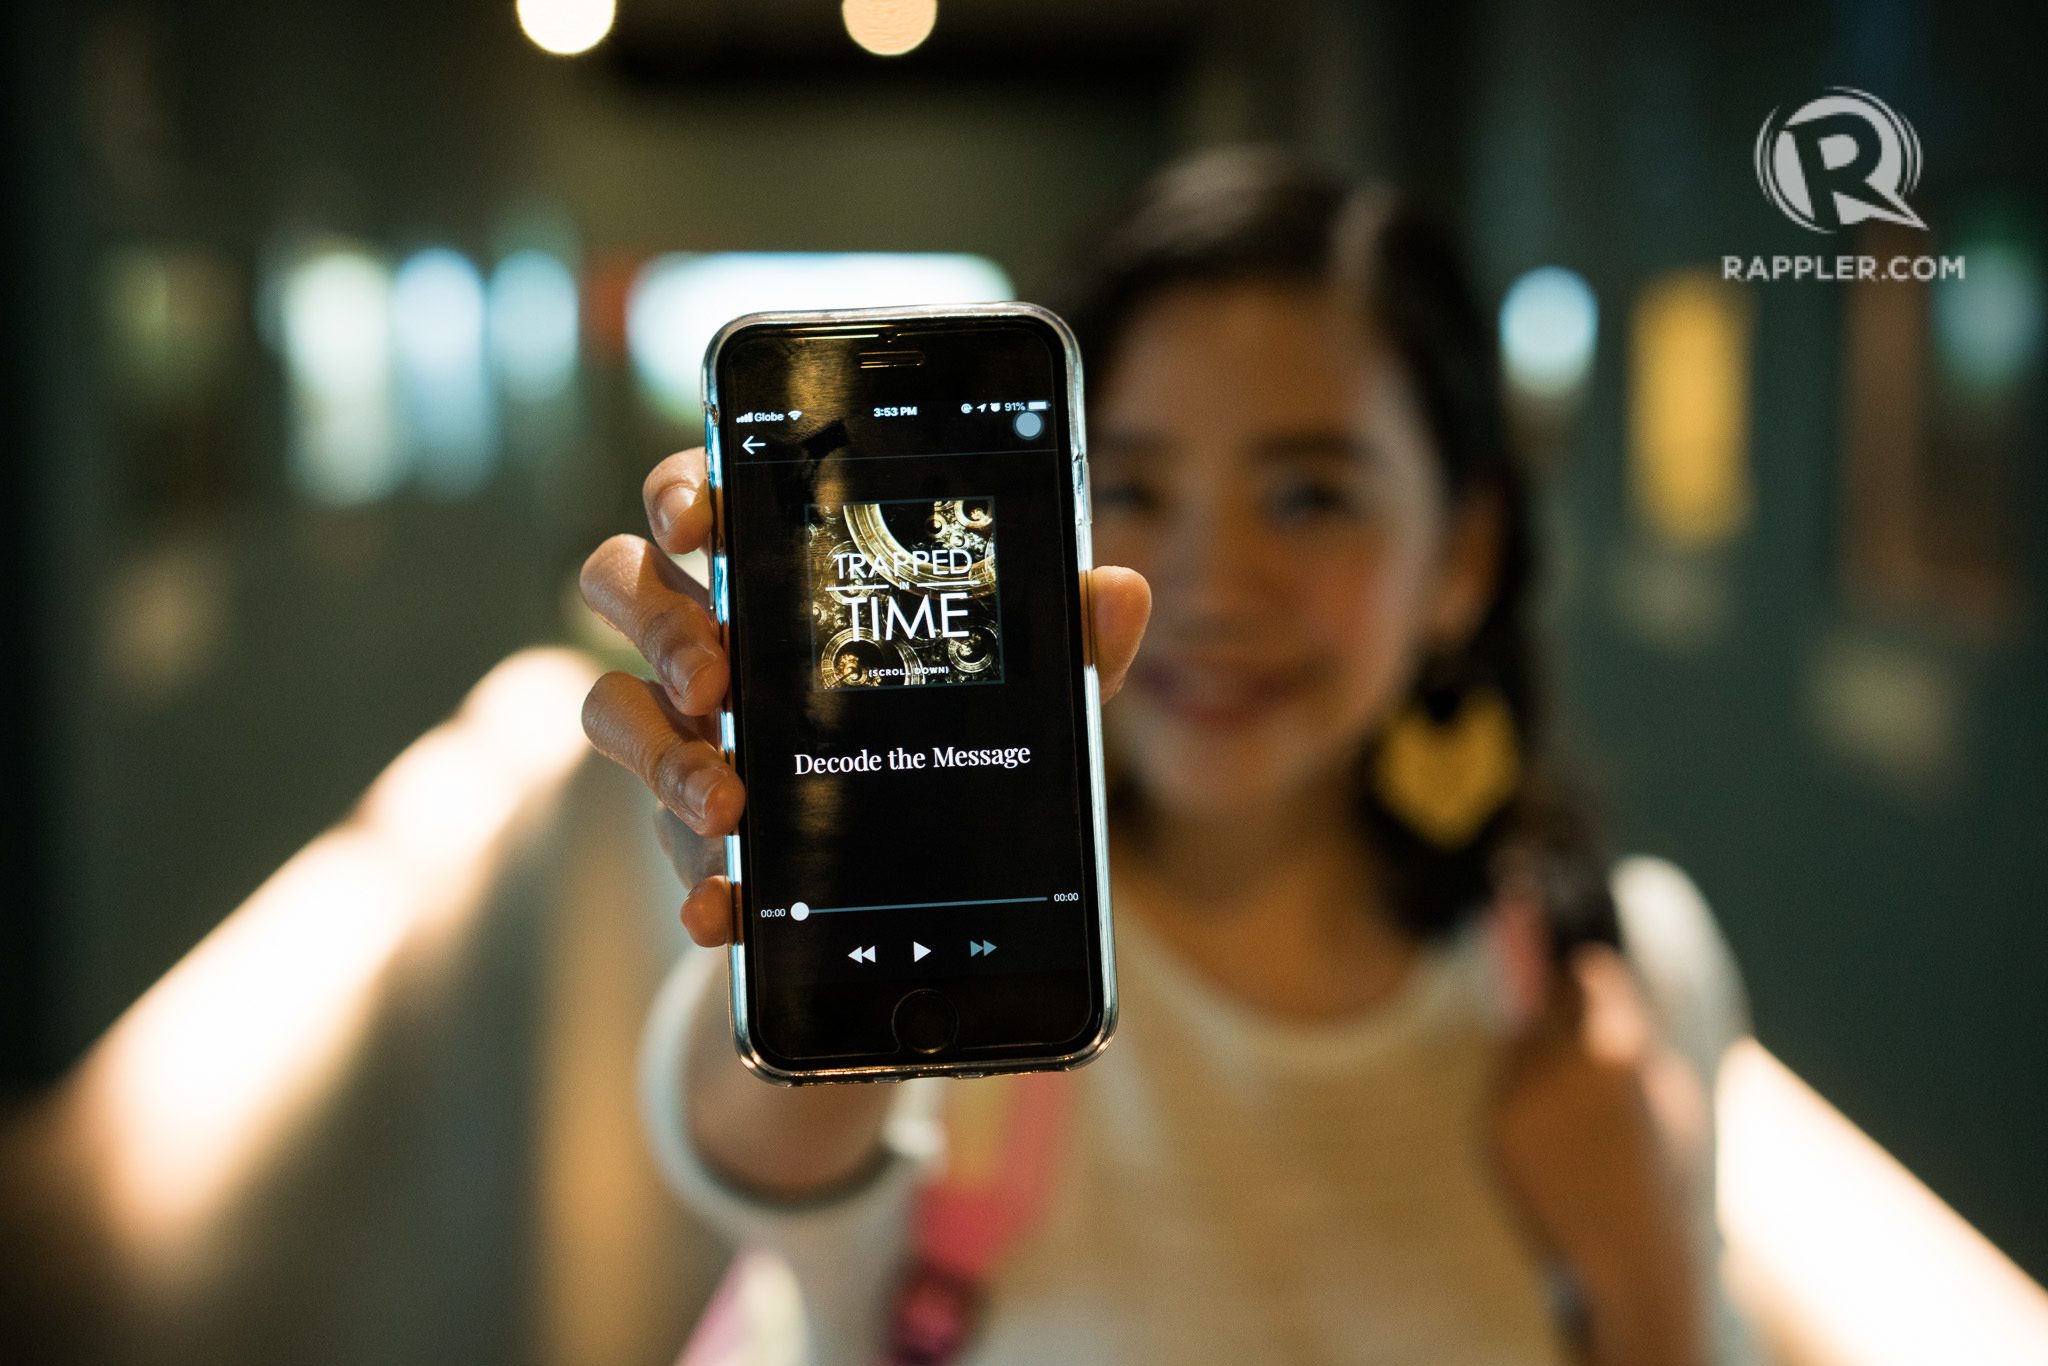 Ayala Museum’s app has a mystery they want you to solve